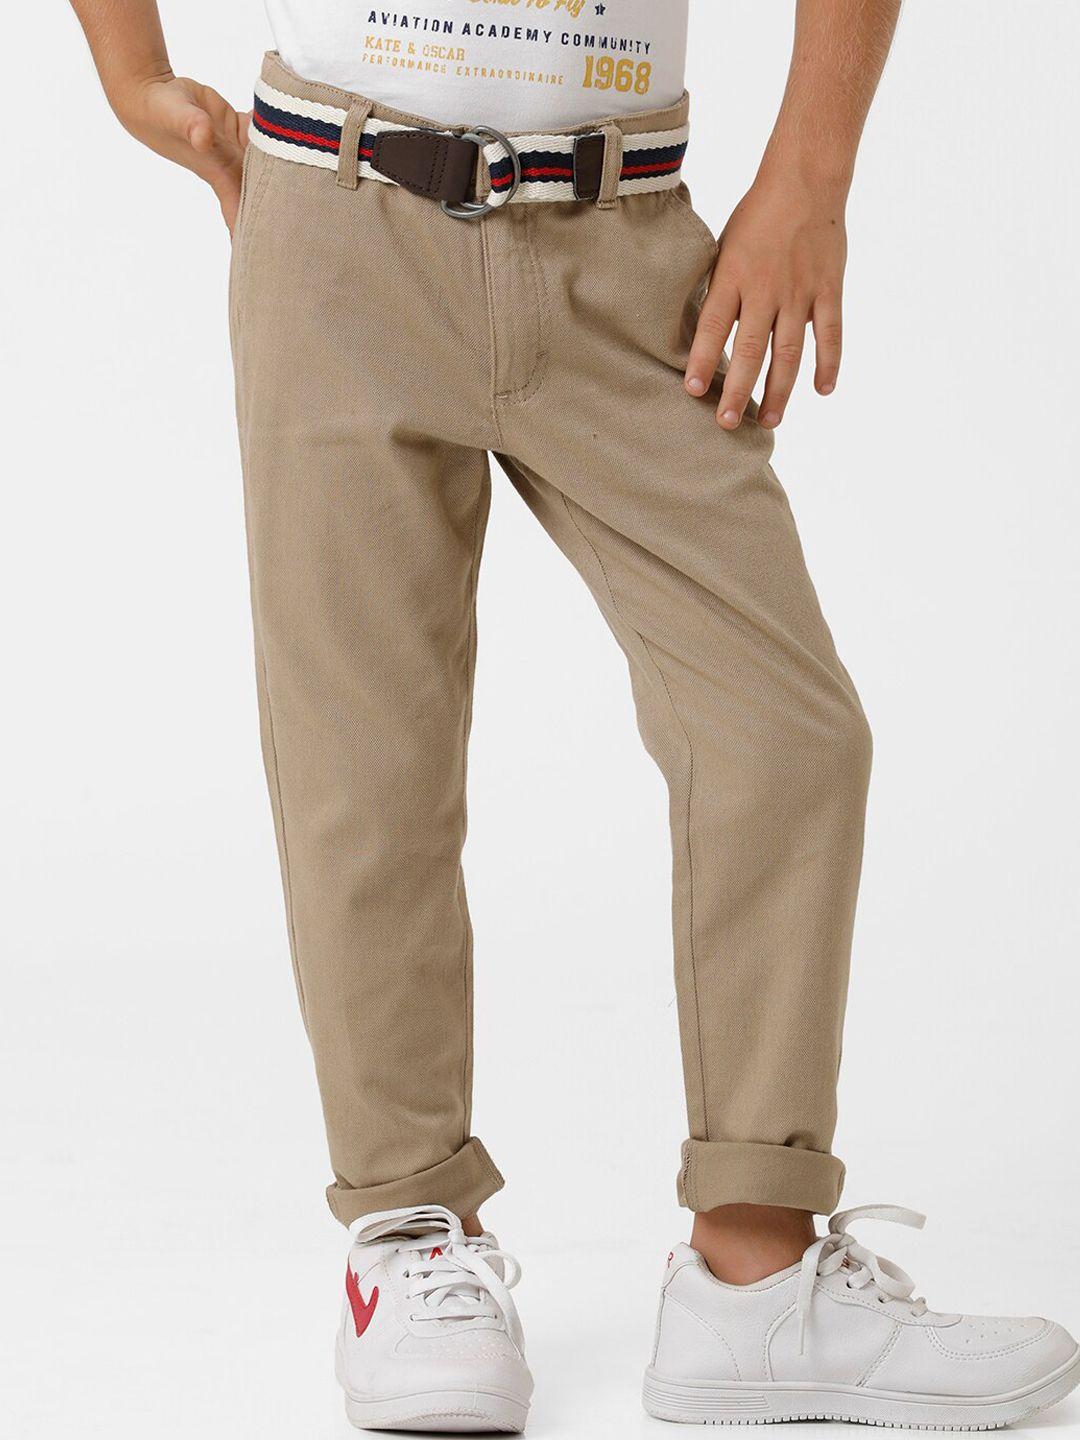 kate & oscar boys smart chinos trousers comes with belt